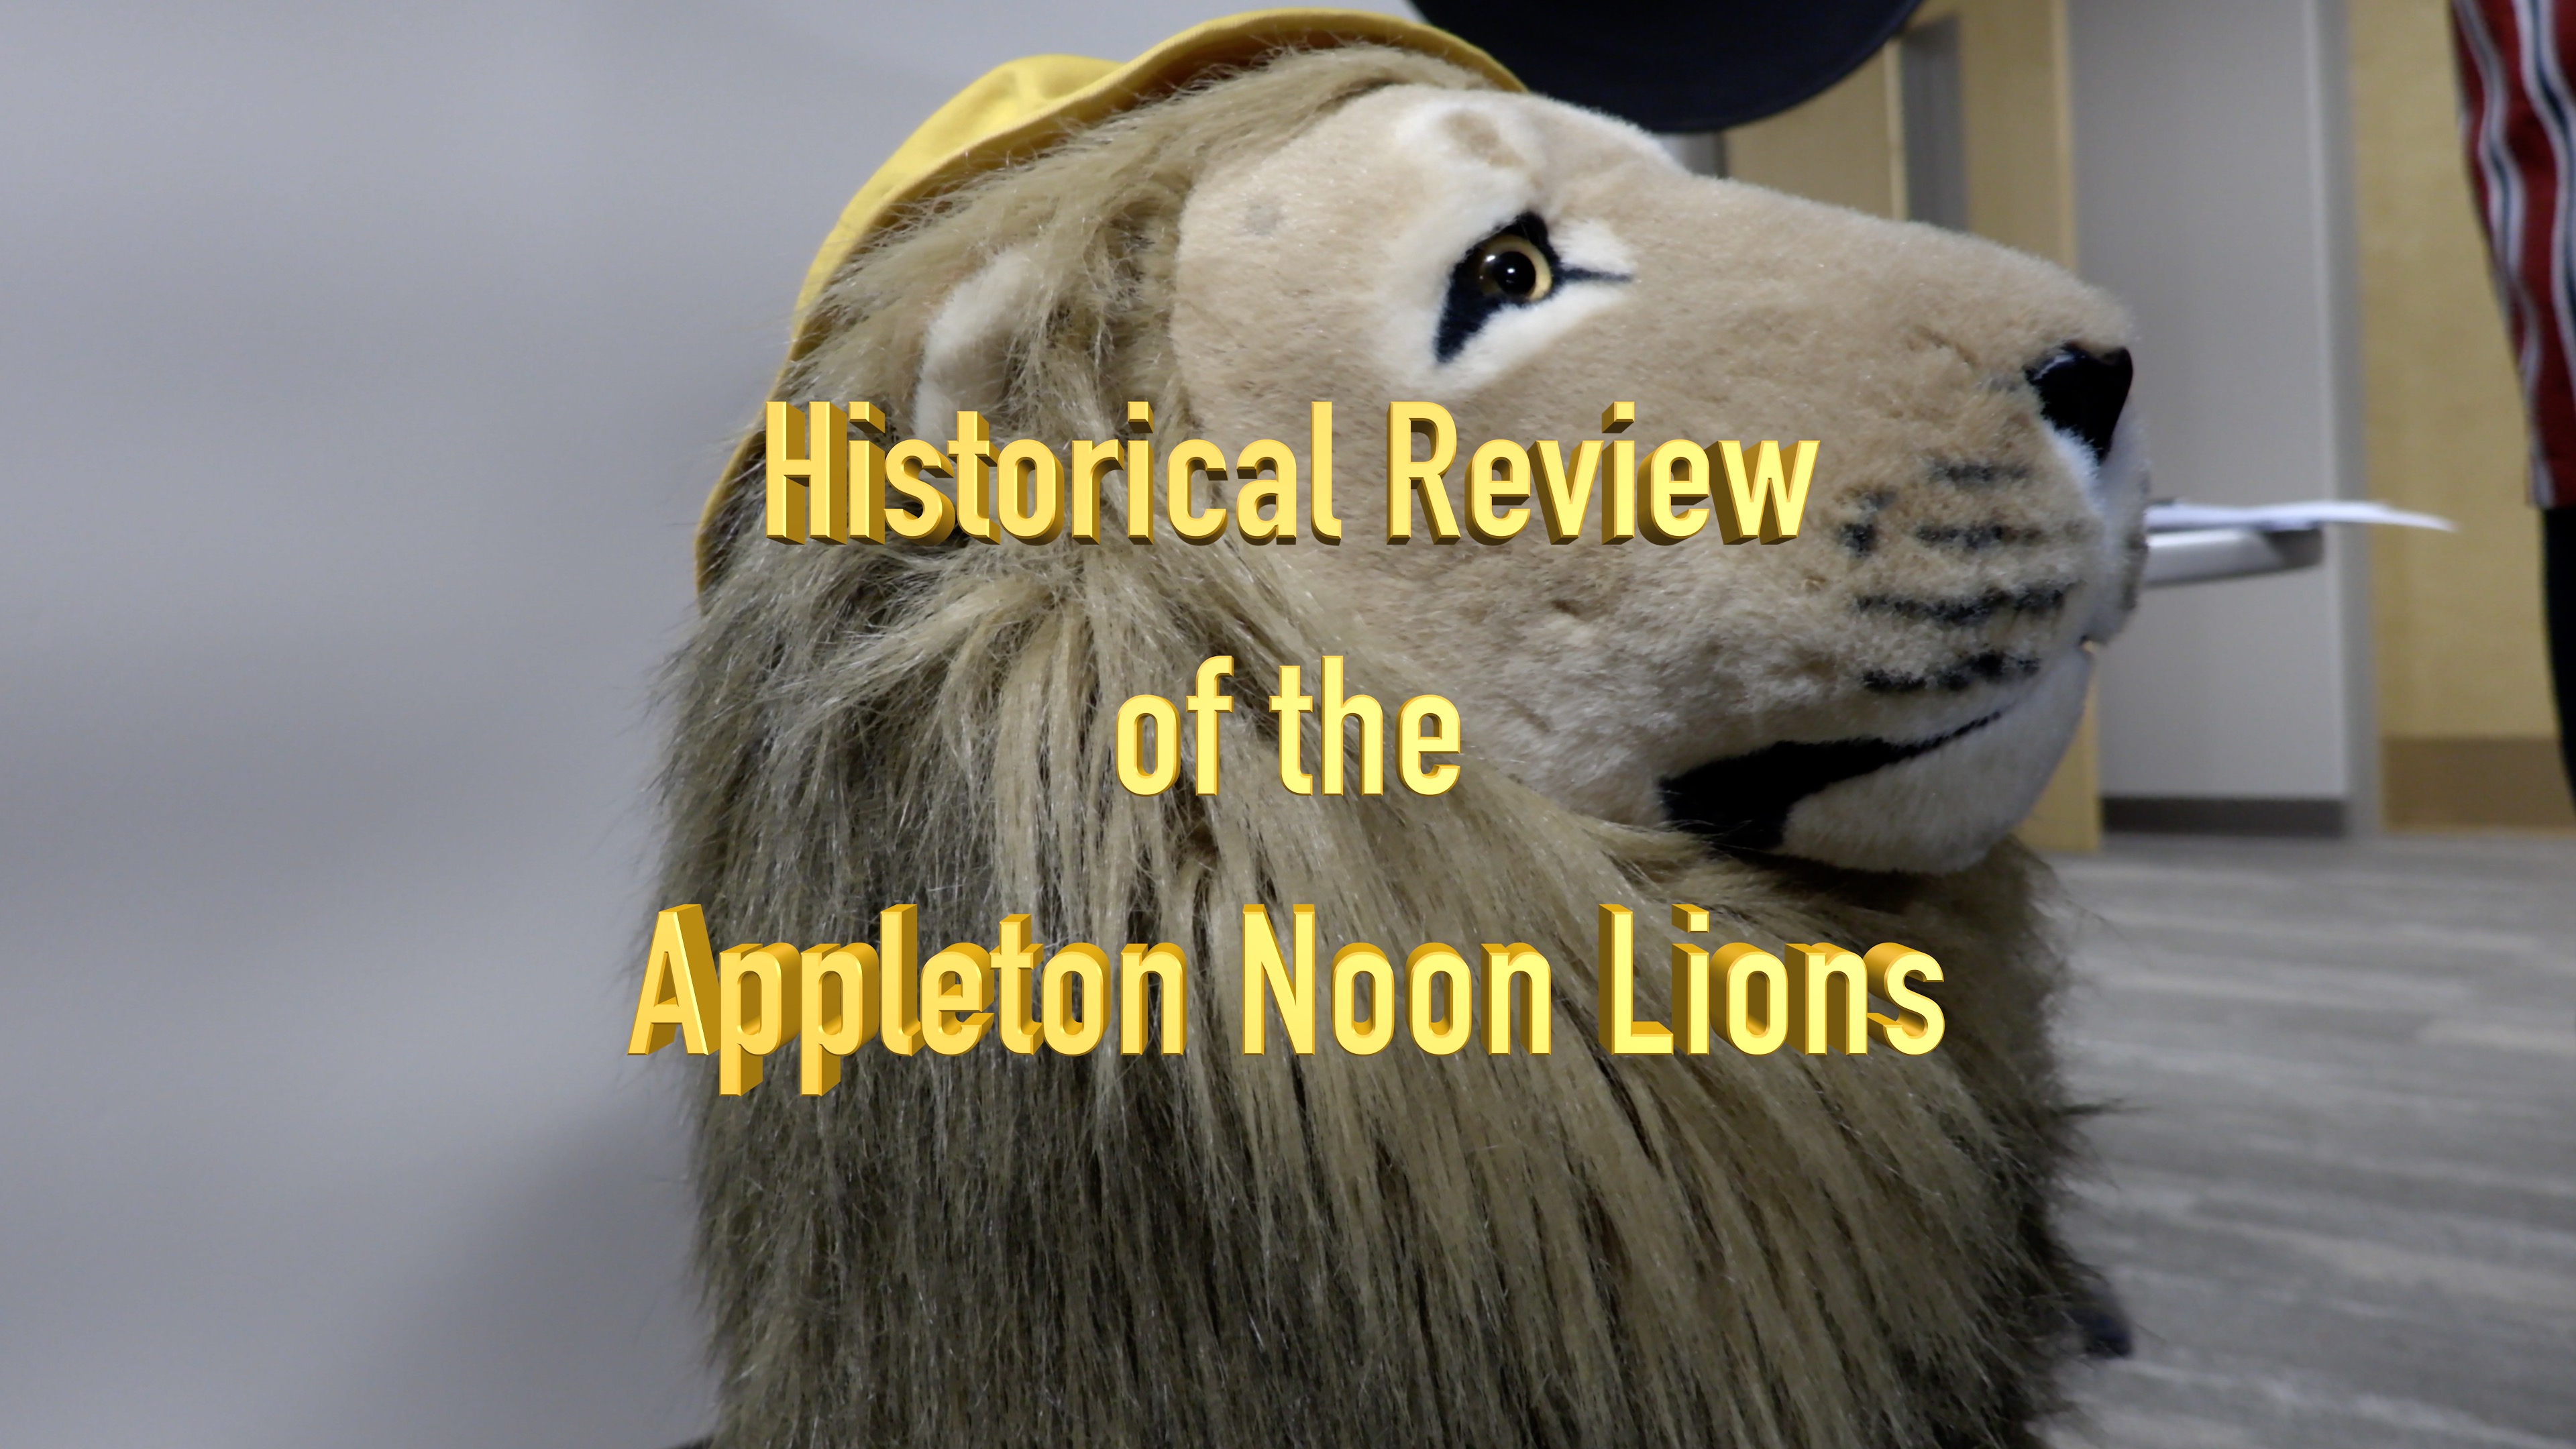 Lions Mark Keller and Dave Lee present a visual story of the life and times of the Appleton Noon Lions.